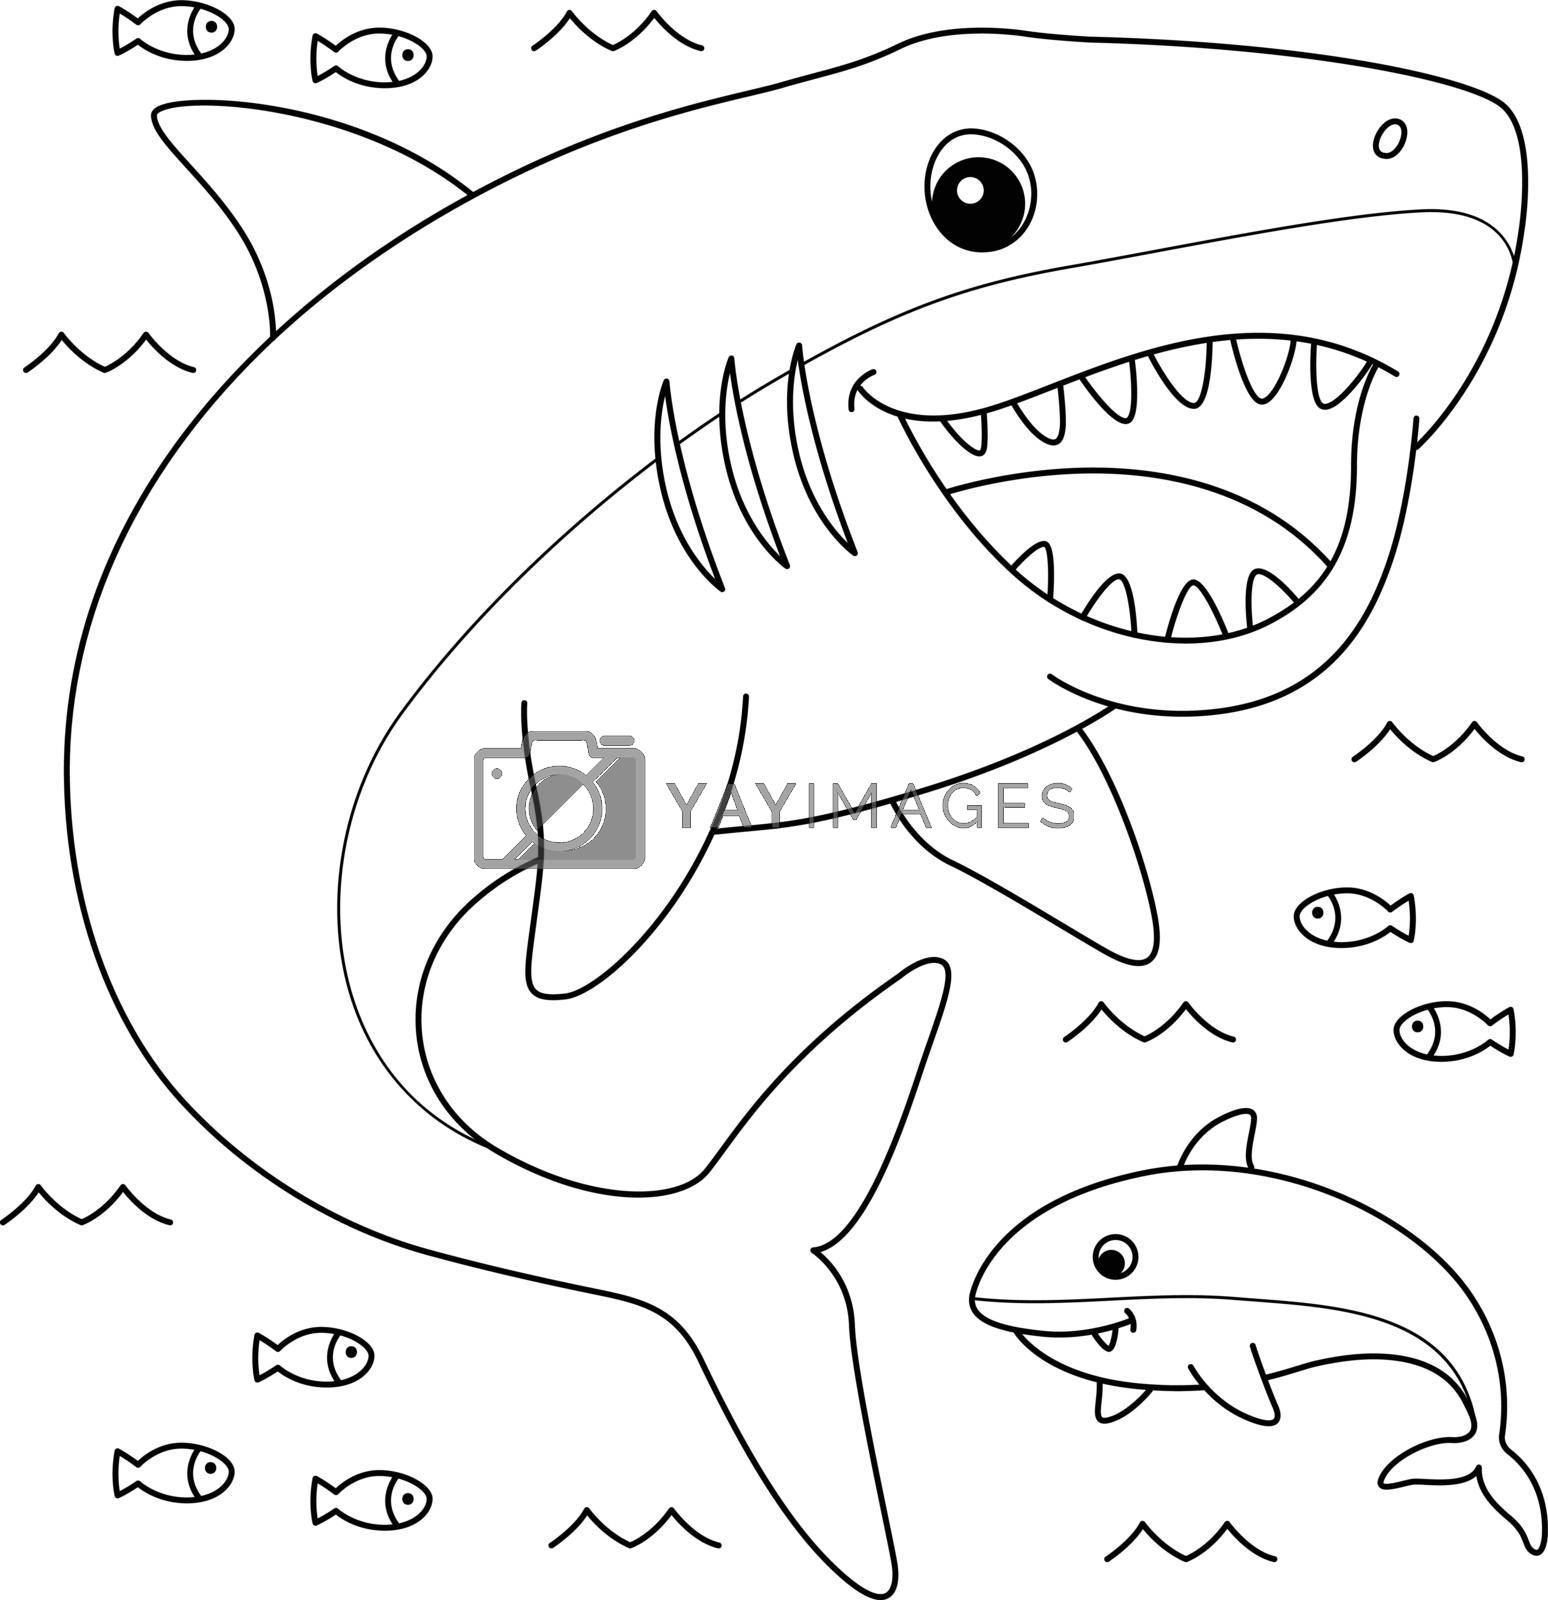 Royalty free image of Megalodon Animal Coloring Page for Kids by abbydesign